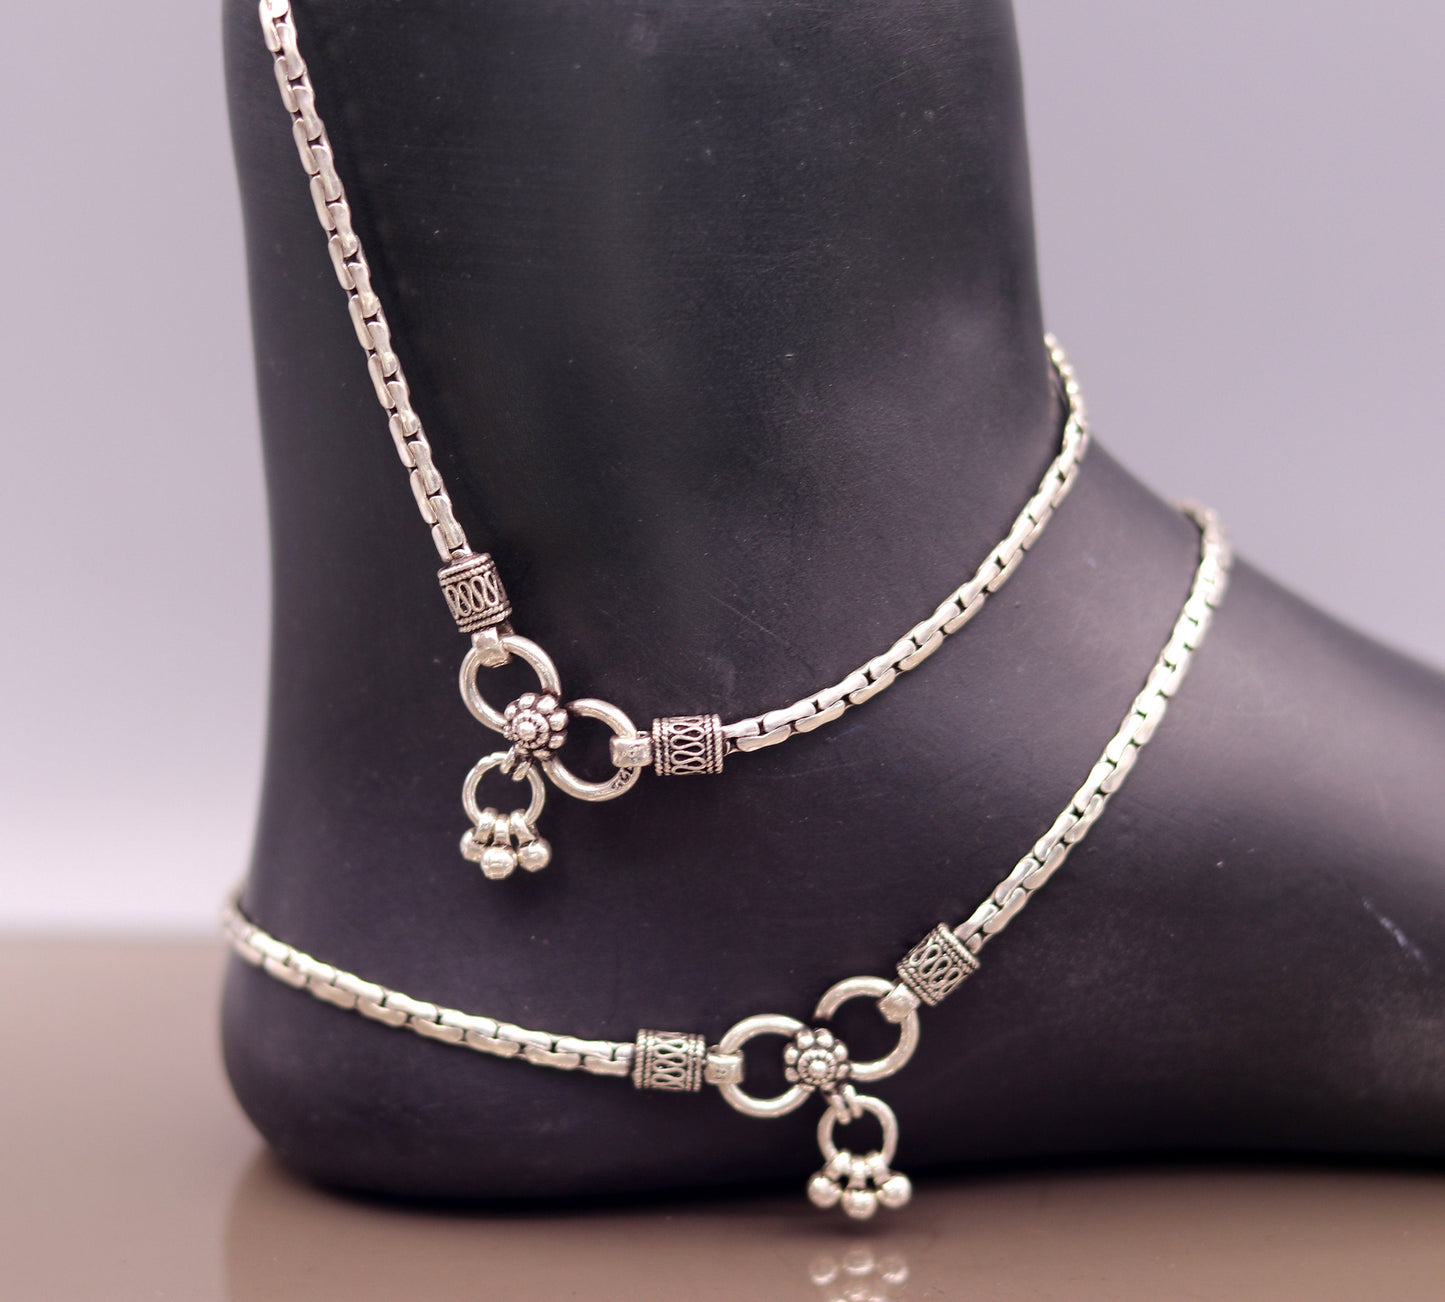 Top class pretty design ankle jewelry Real 925 sterling silver anklet, excellent mother's day gifting tribal belly dance jewelry india ank38 - TRIBAL ORNAMENTS